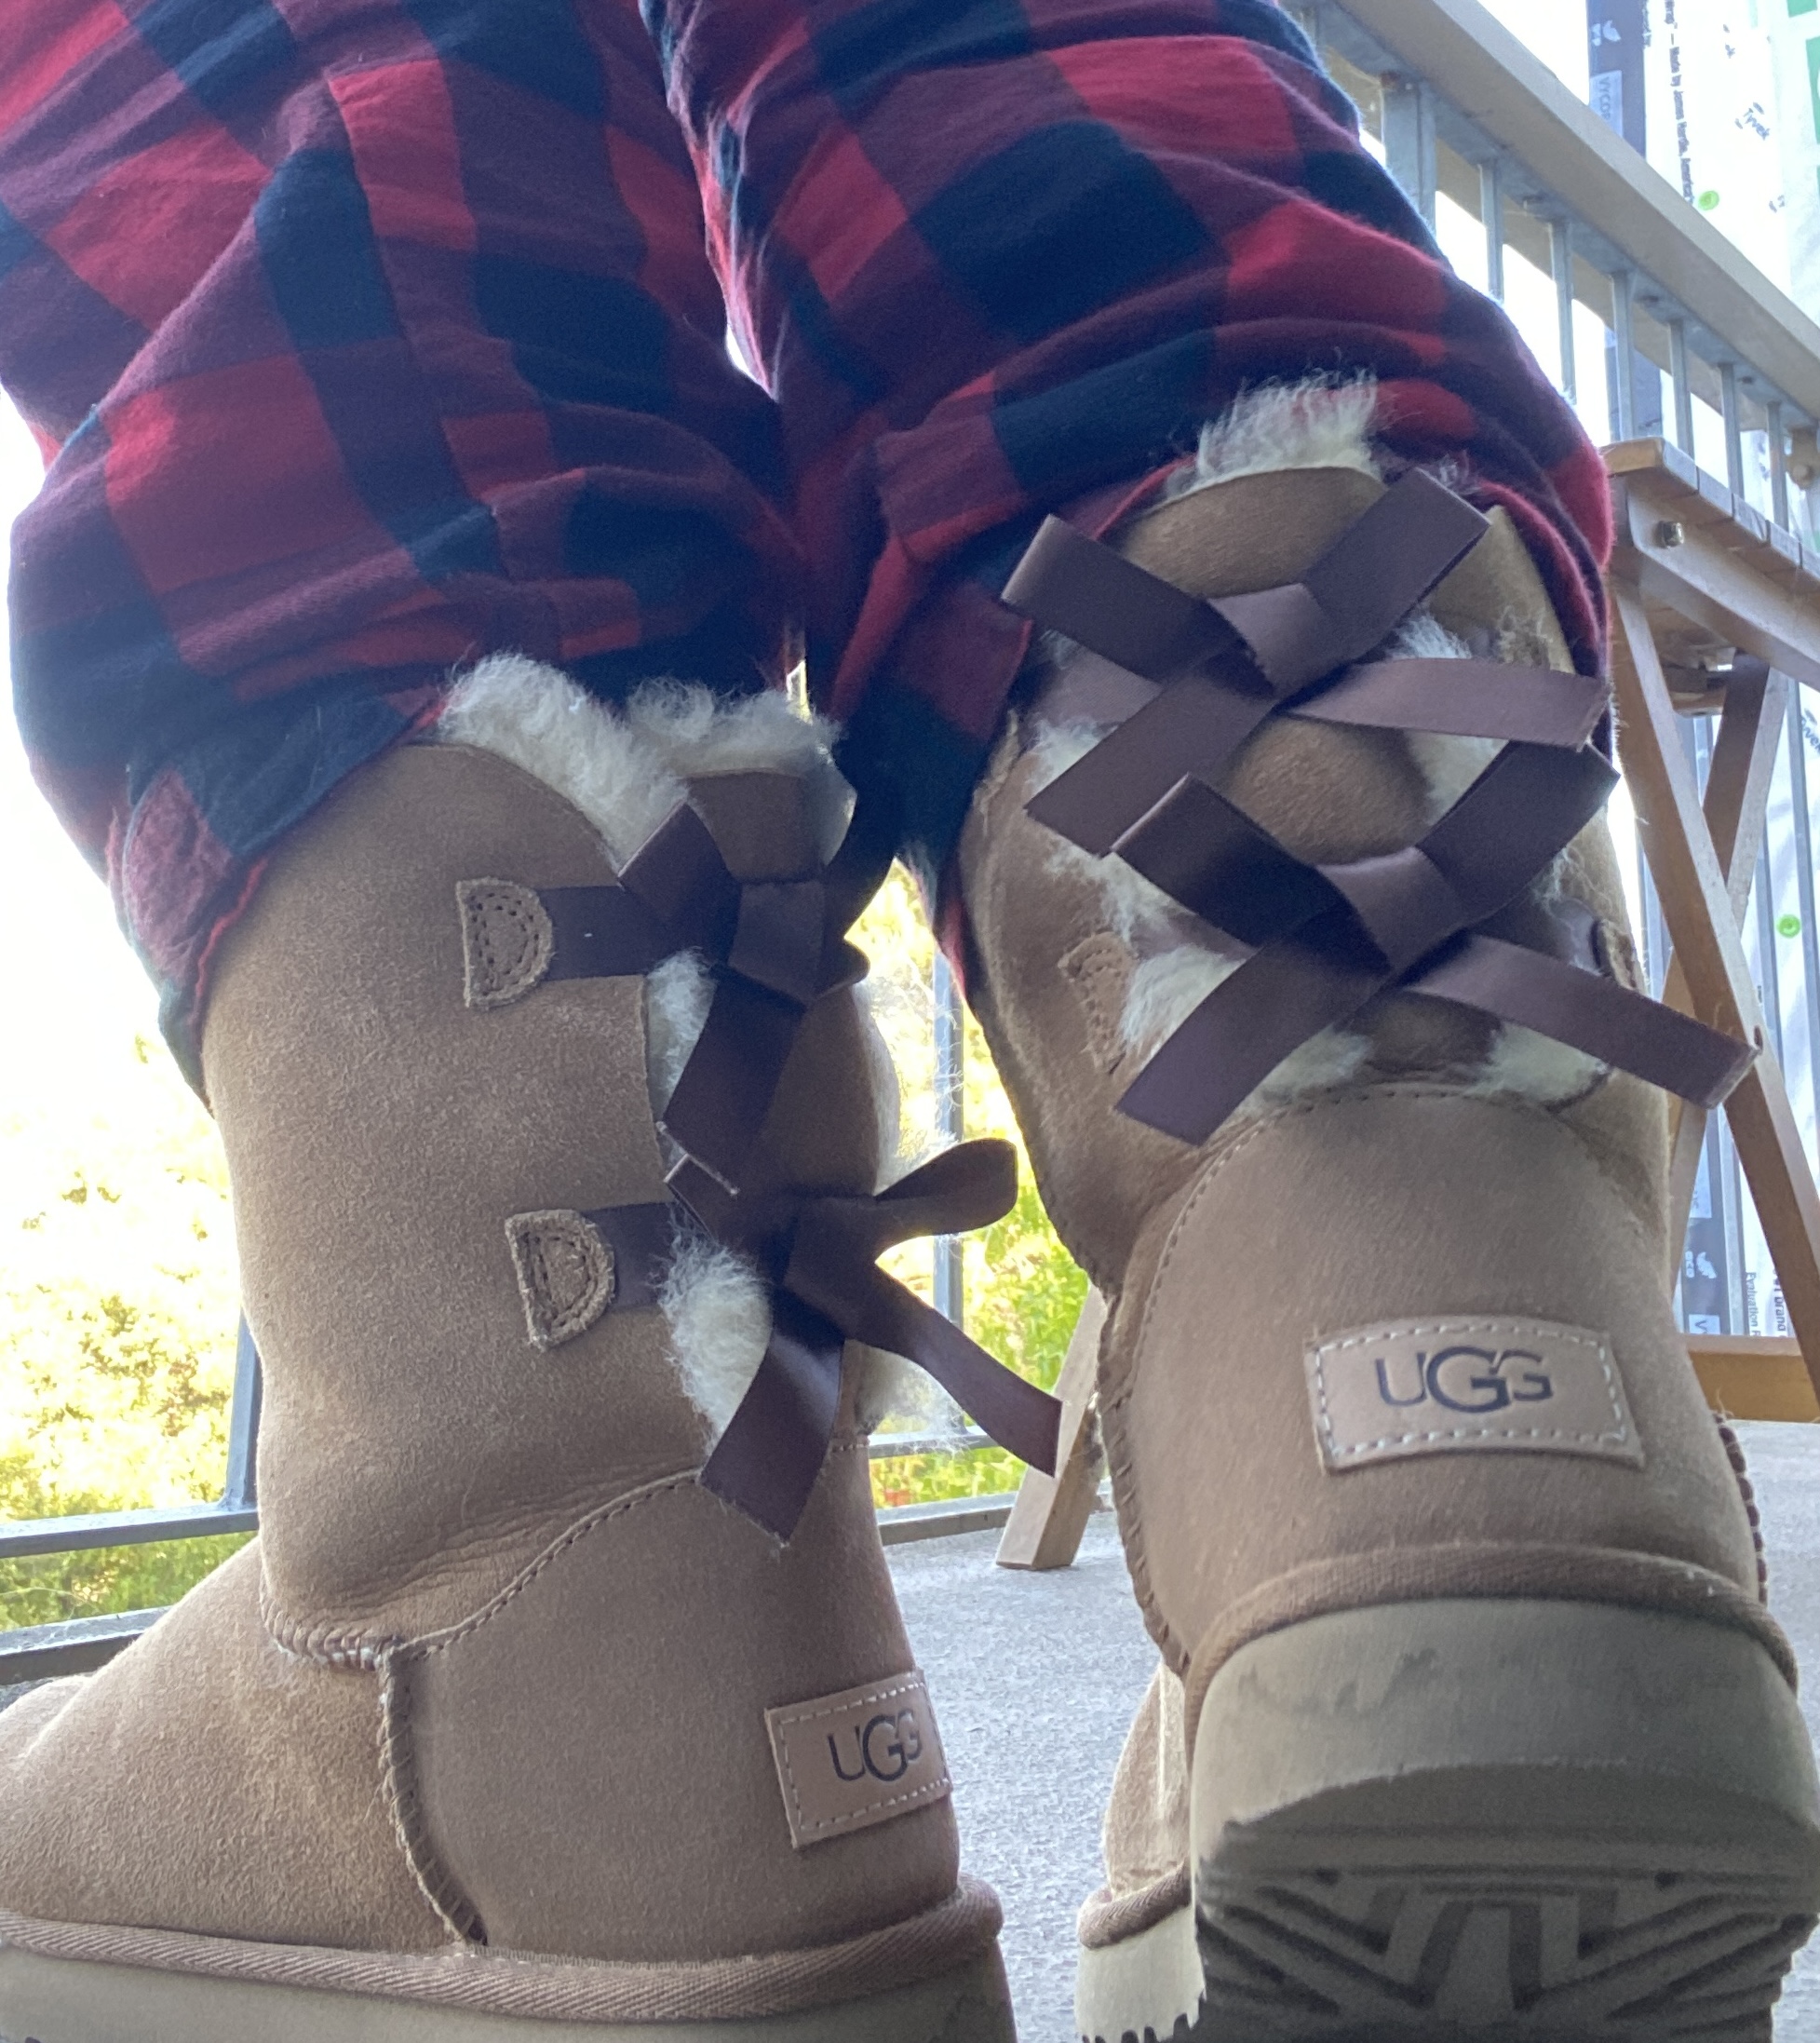 Ugg come in a variety of different styles.